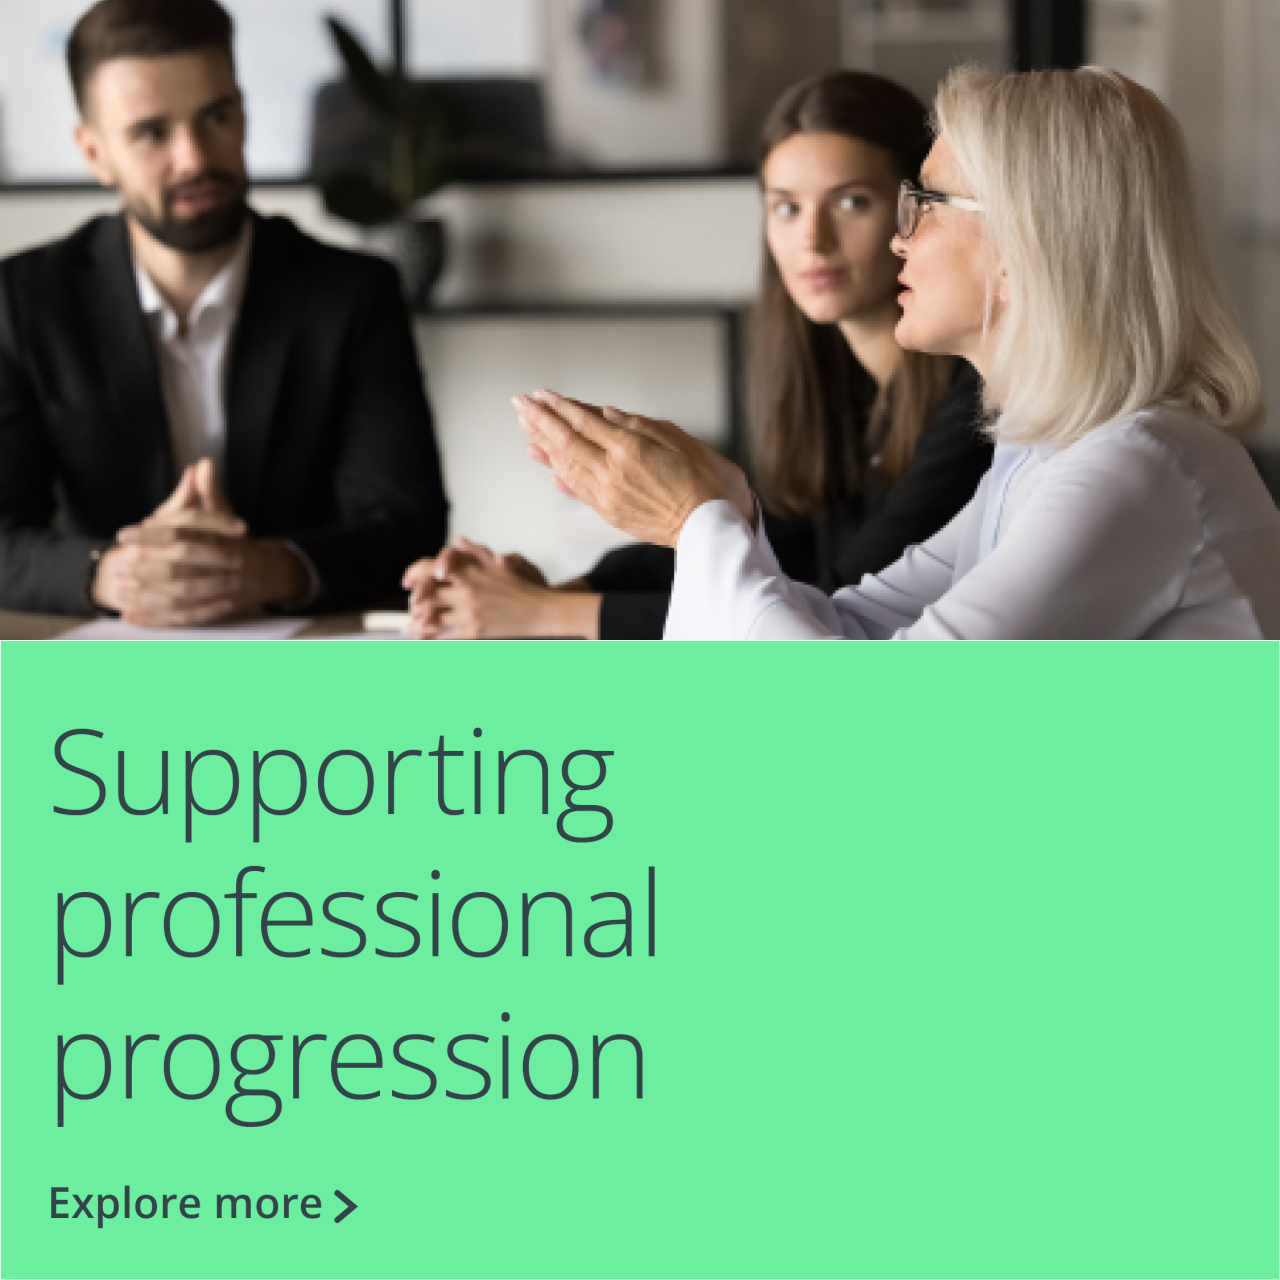 Section 5: Supporting professional progression